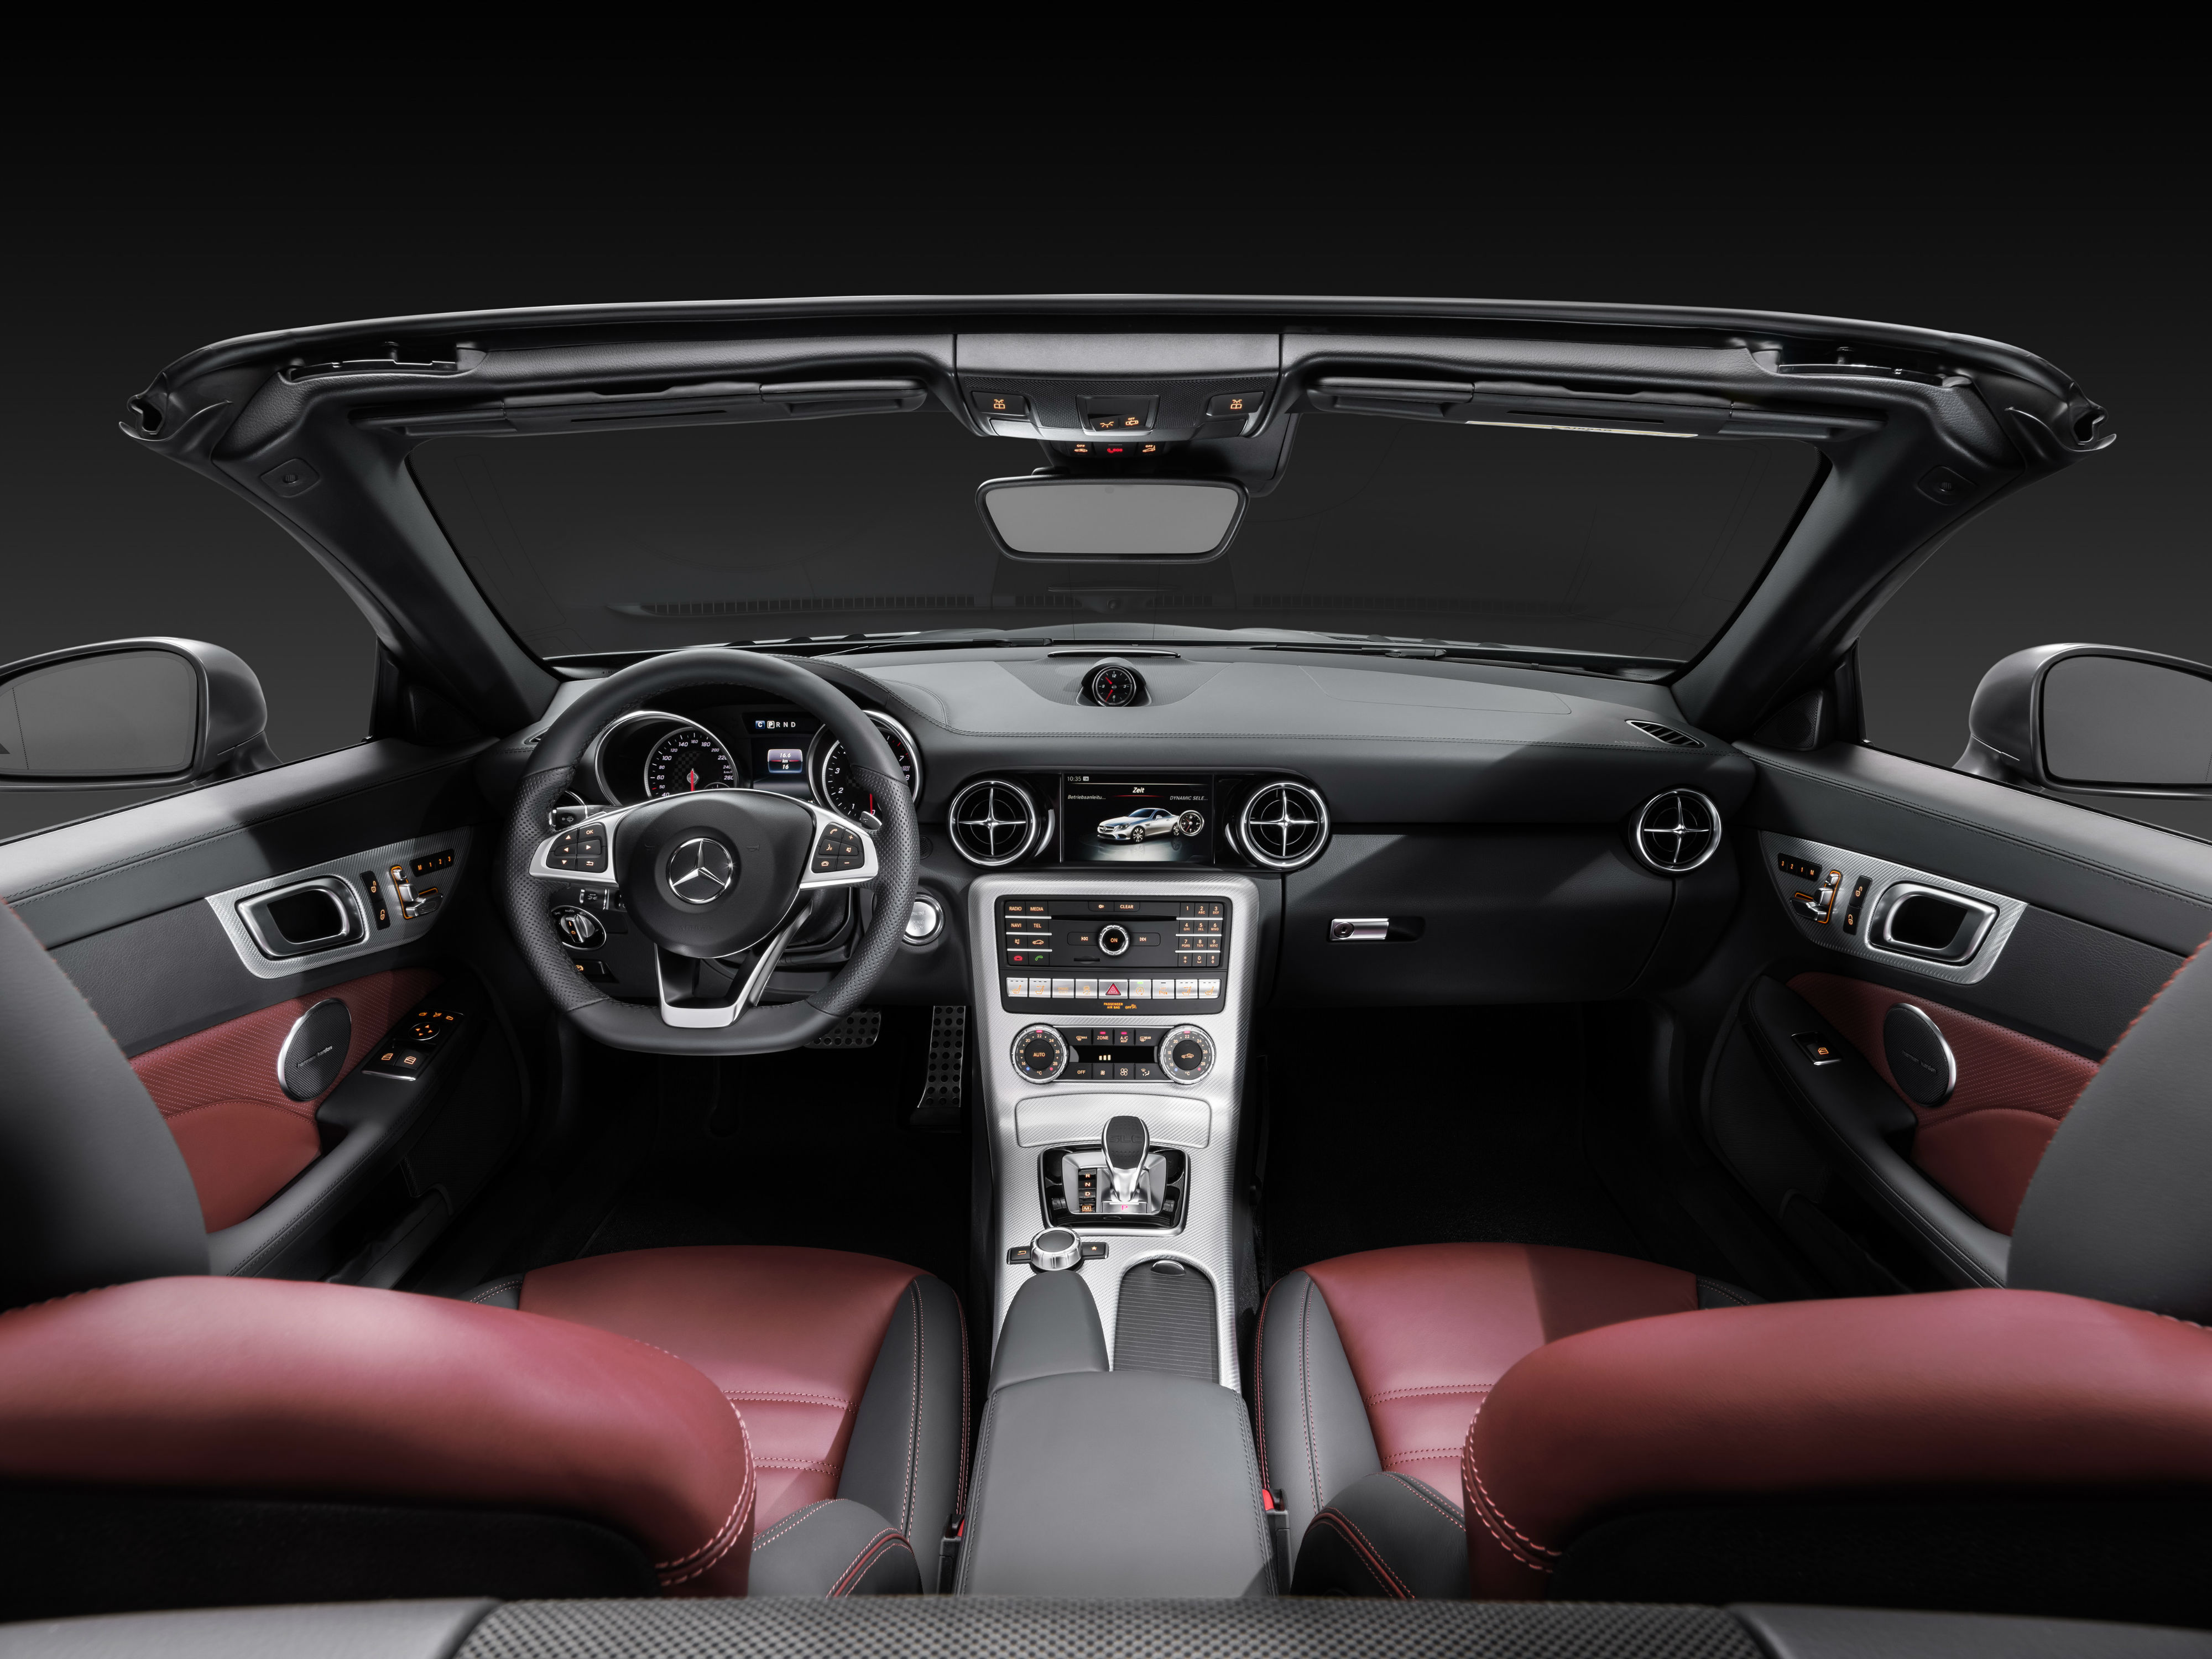 Mercedes SLC 2016 news and pictures of interior